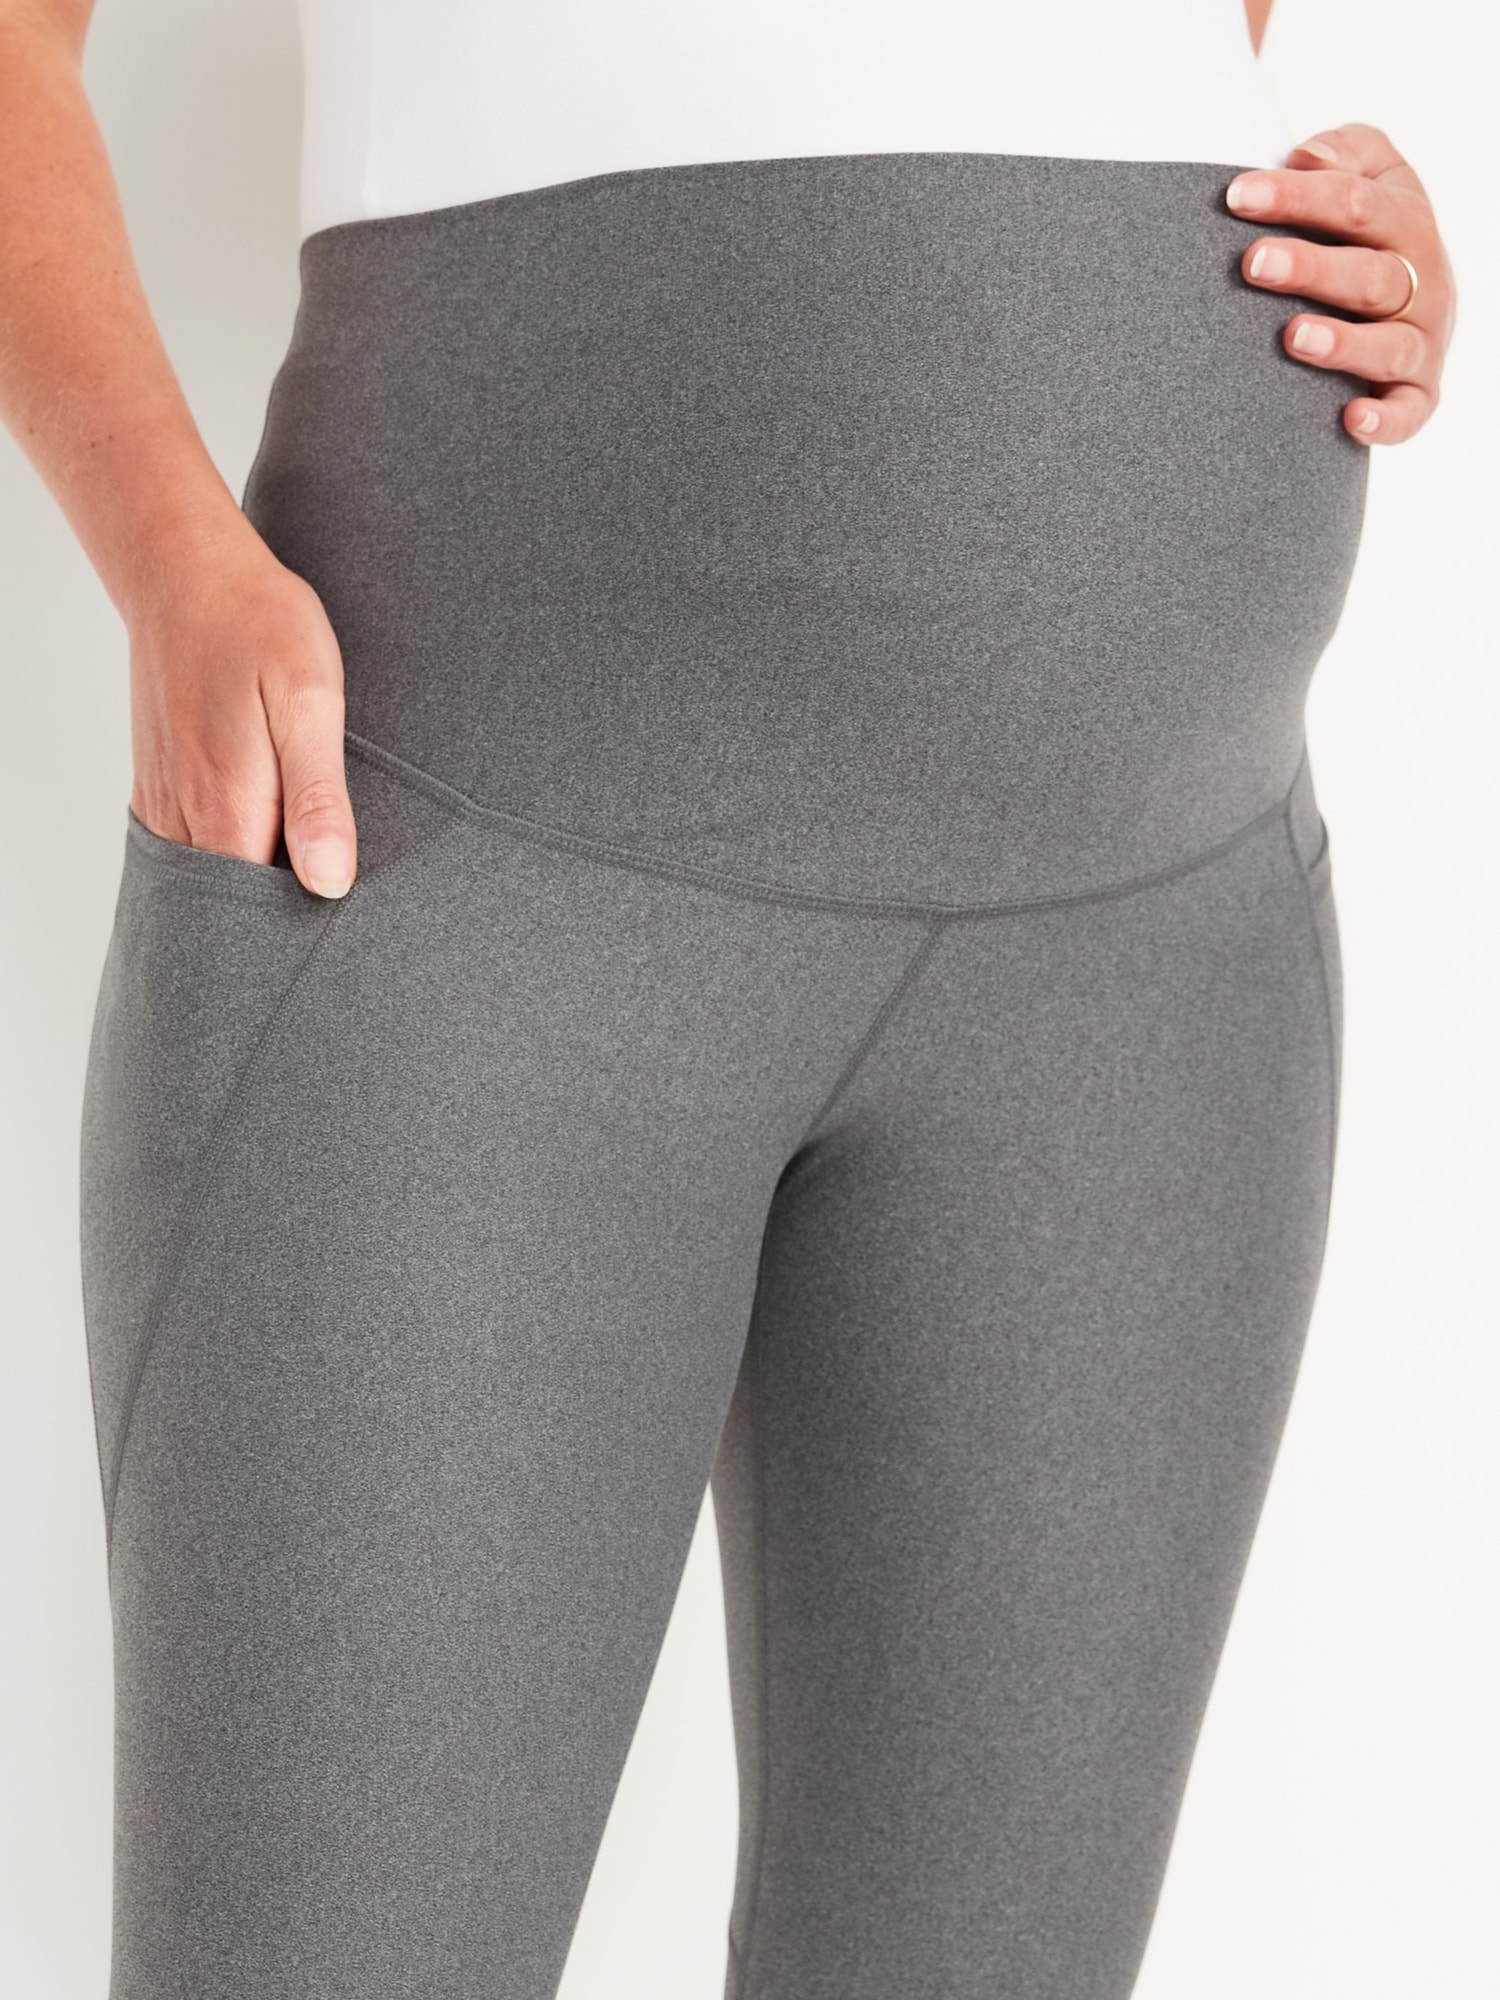 New Old Navy Active Maternity Go Dry Charcoal Gray Leggings High